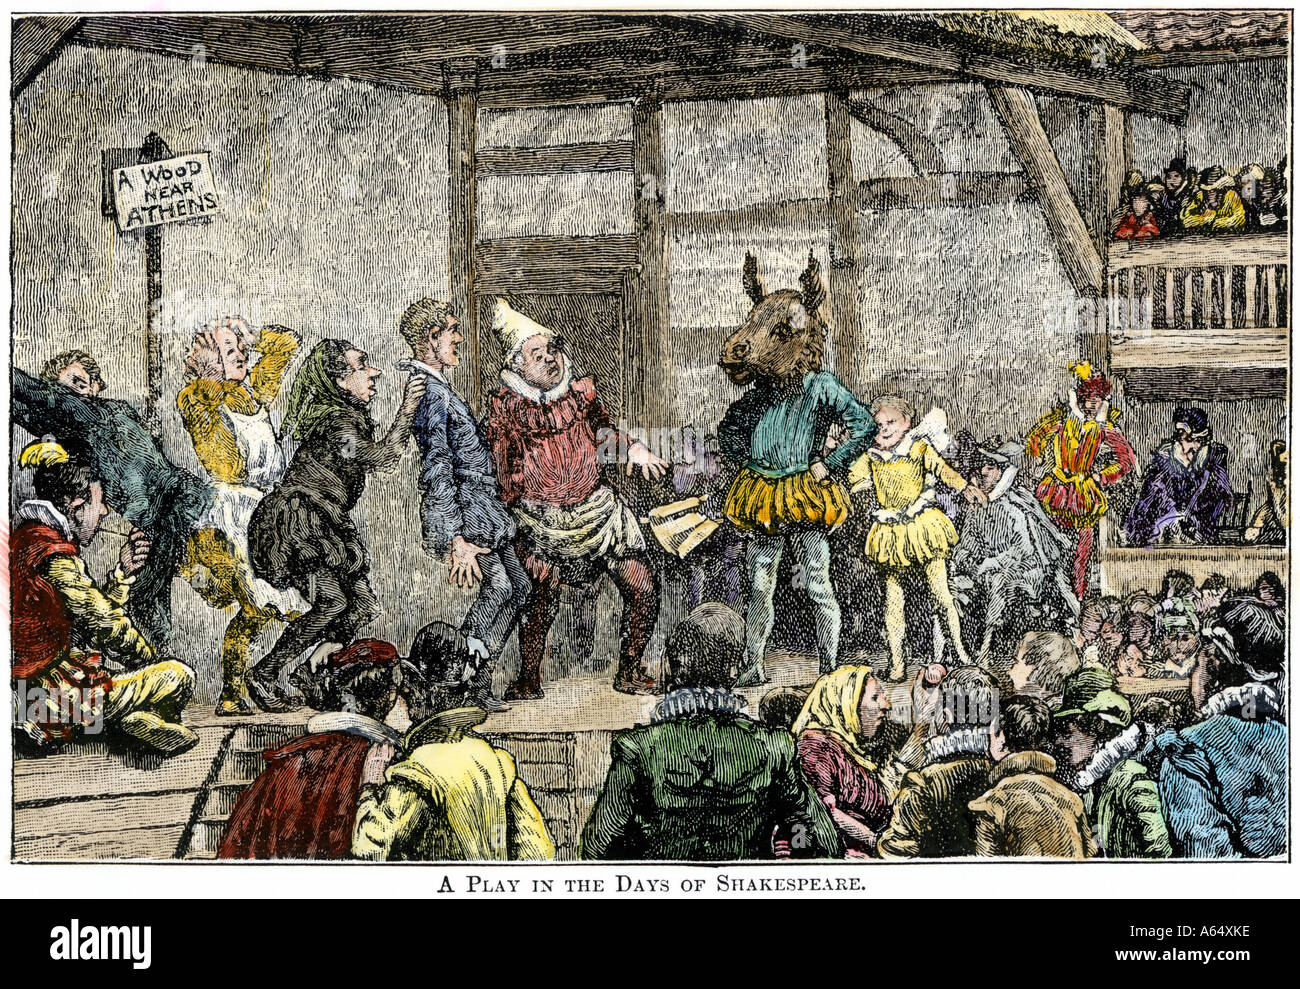 Theatrical performance in the days of Shakespeare. Hand-colored woodcut Stock Photo